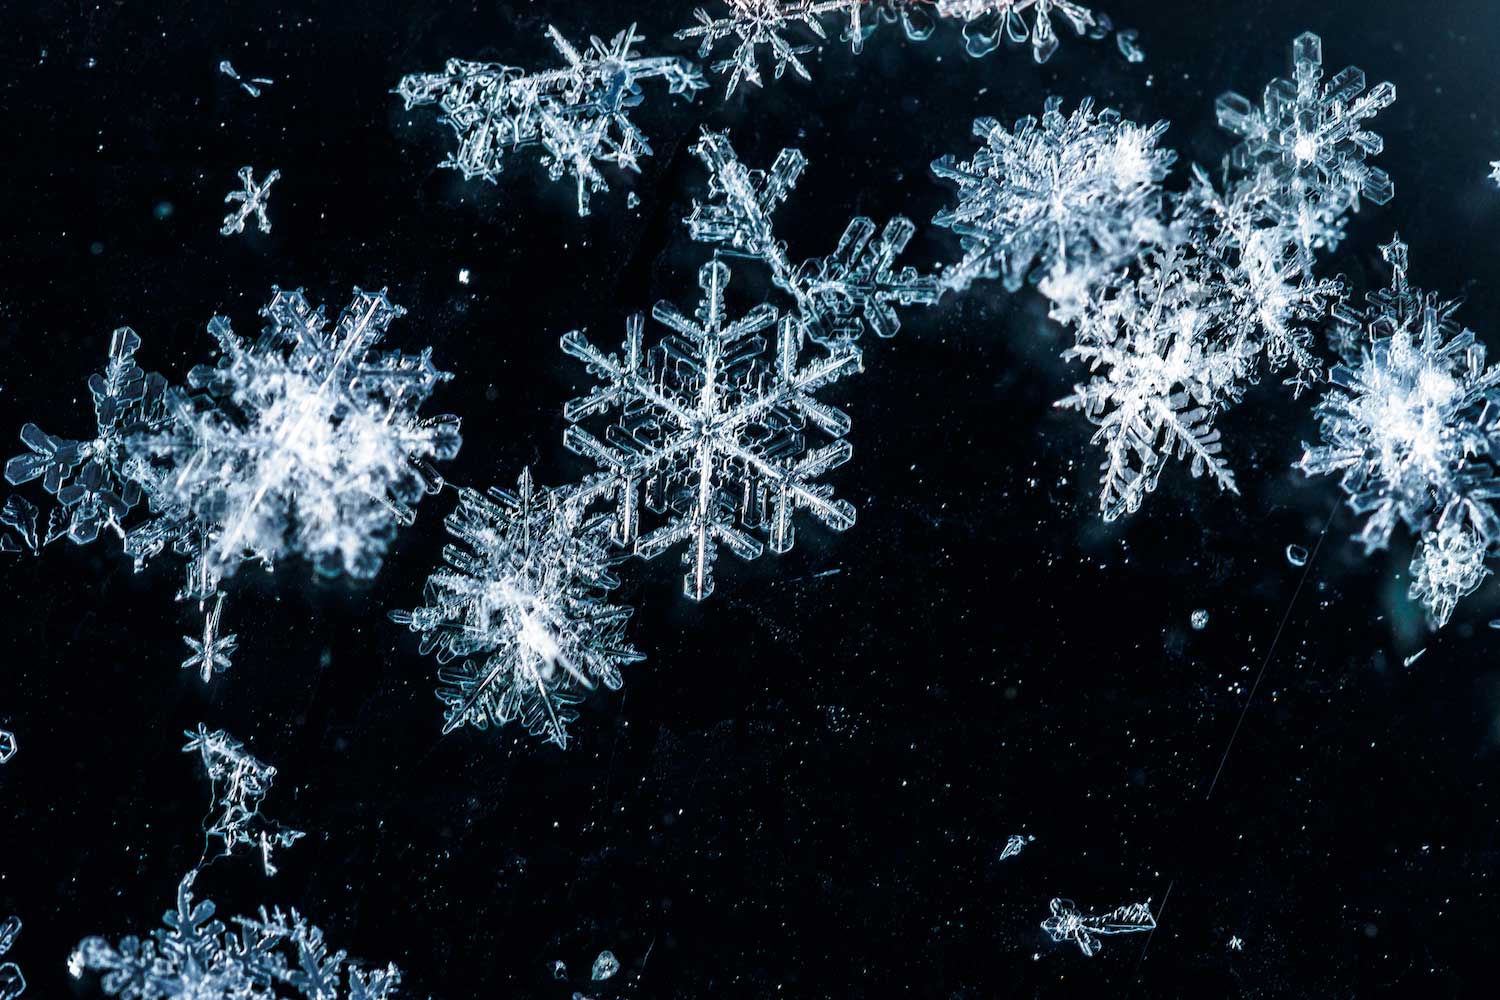 A closeup of snowflakes on a dark background.